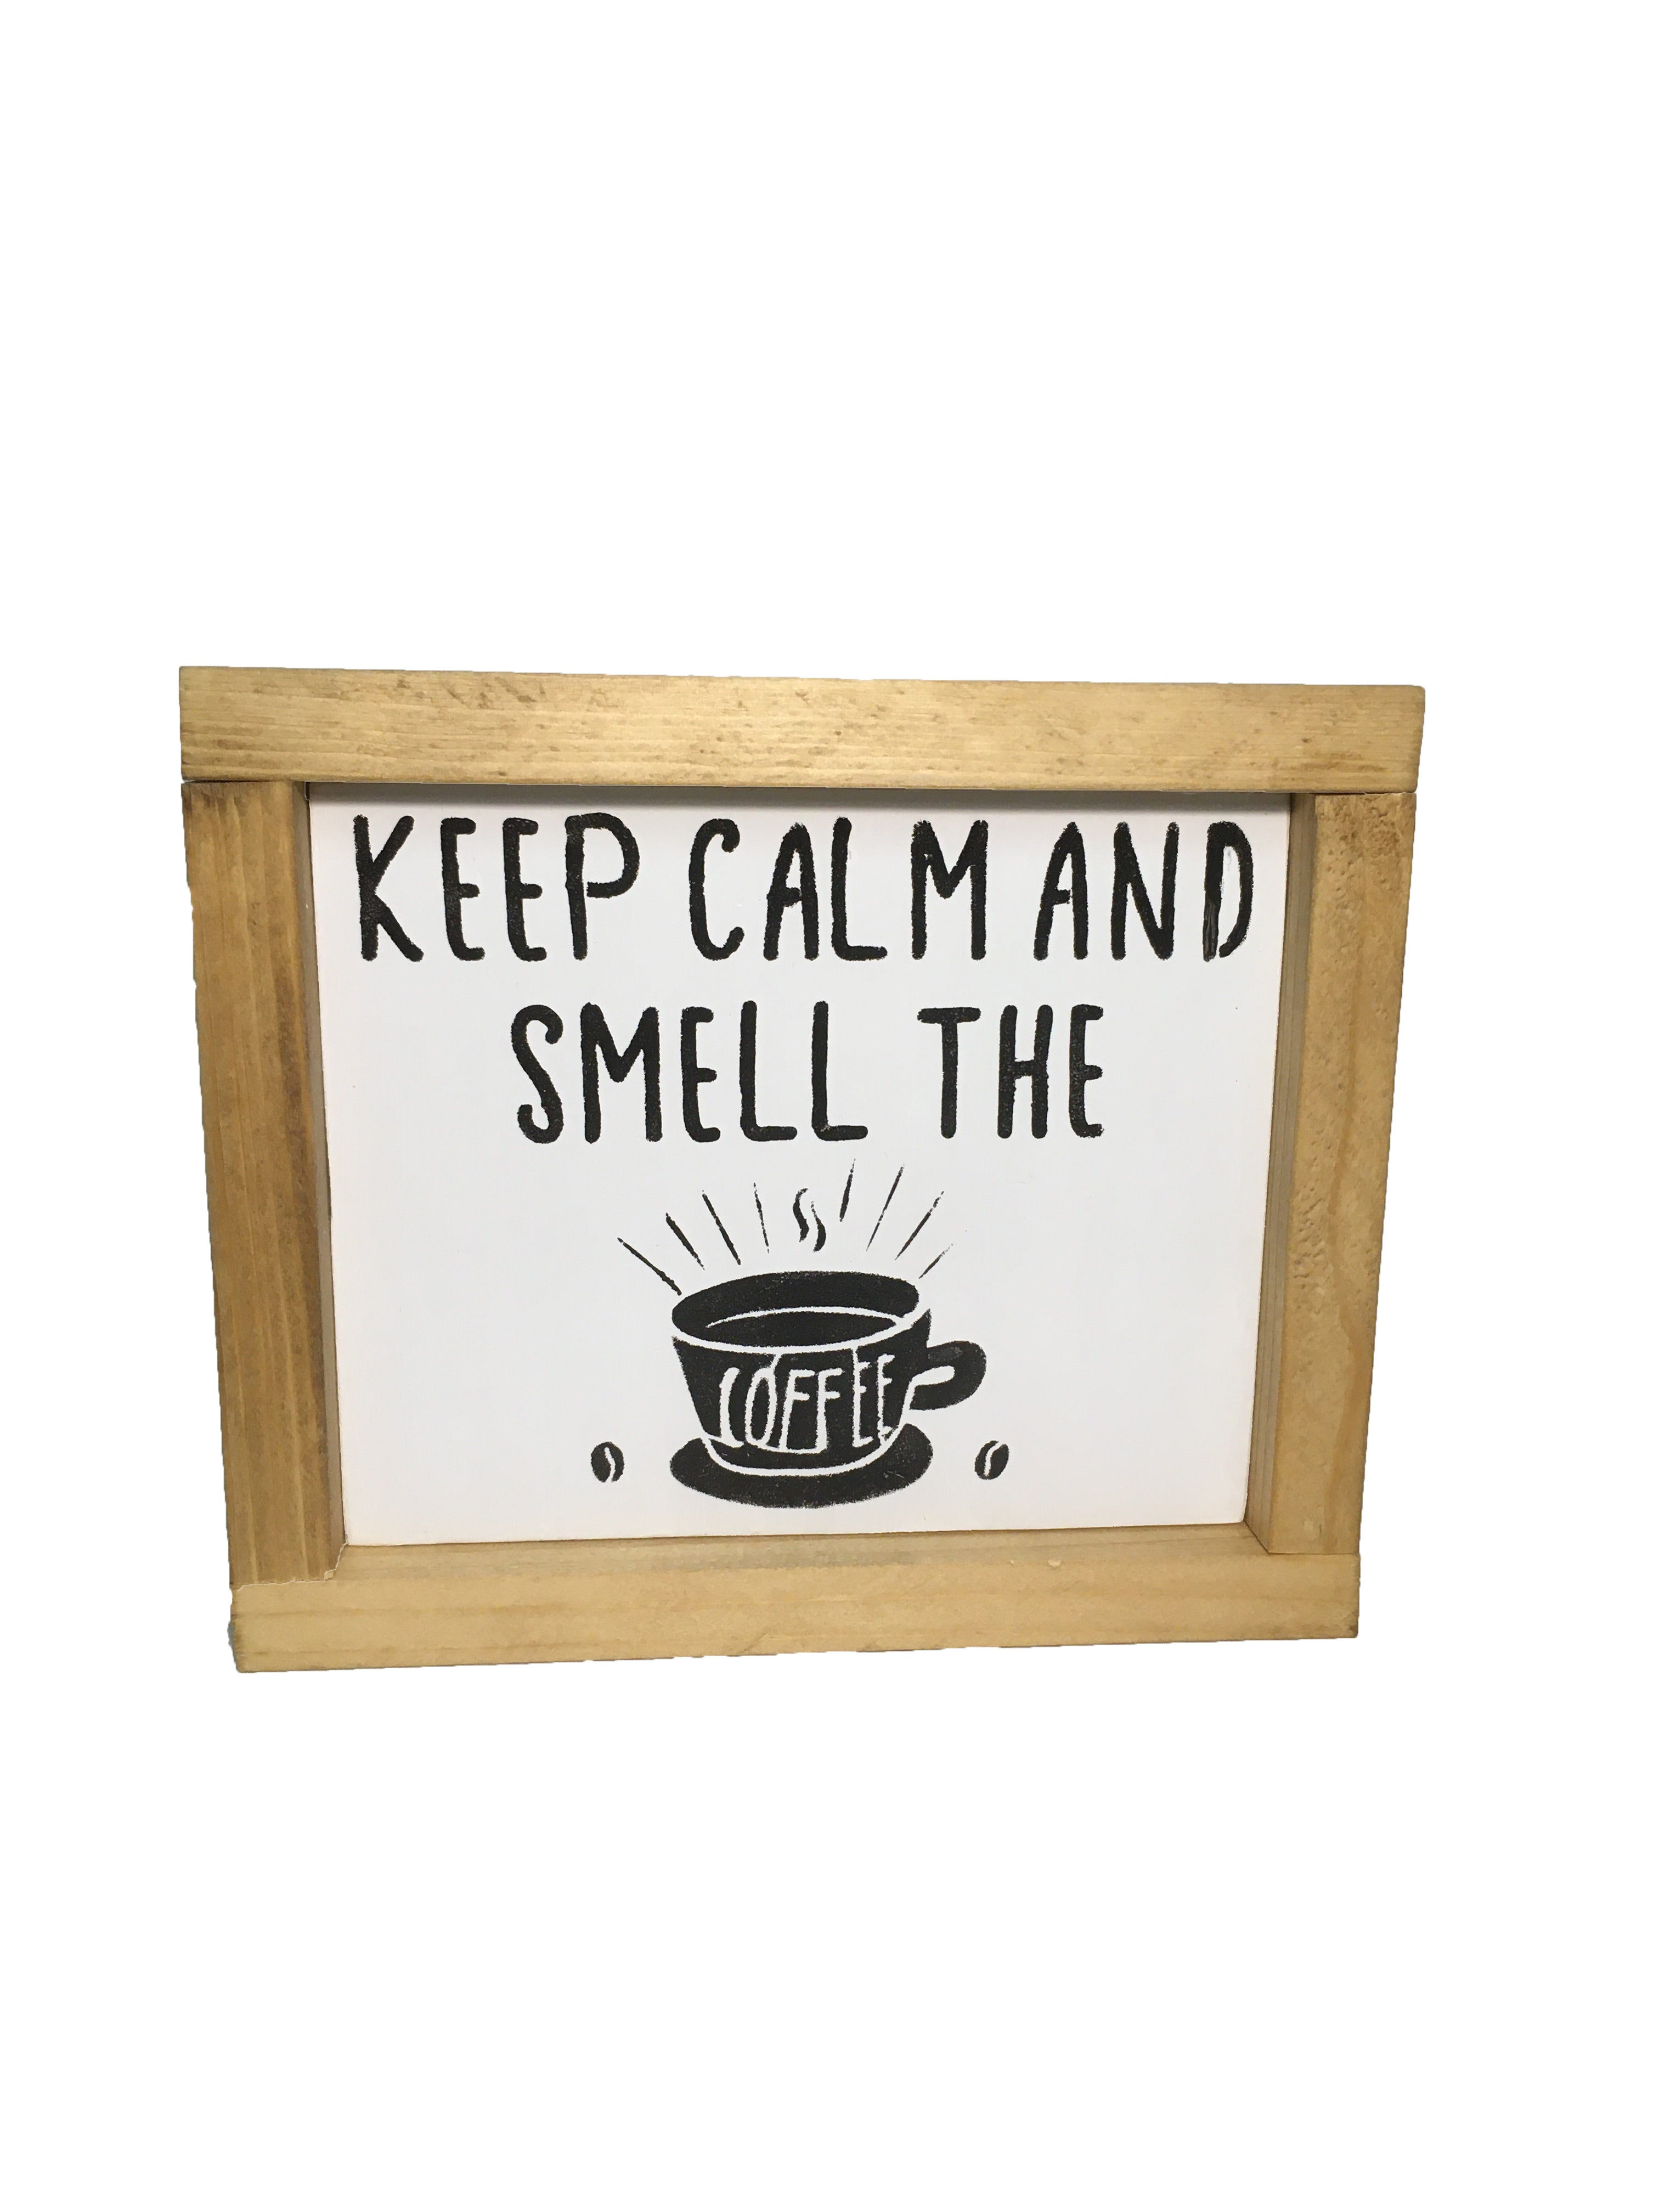 Keep Calm and Smell the Coffee! Kitchen sign - Everyday Decor